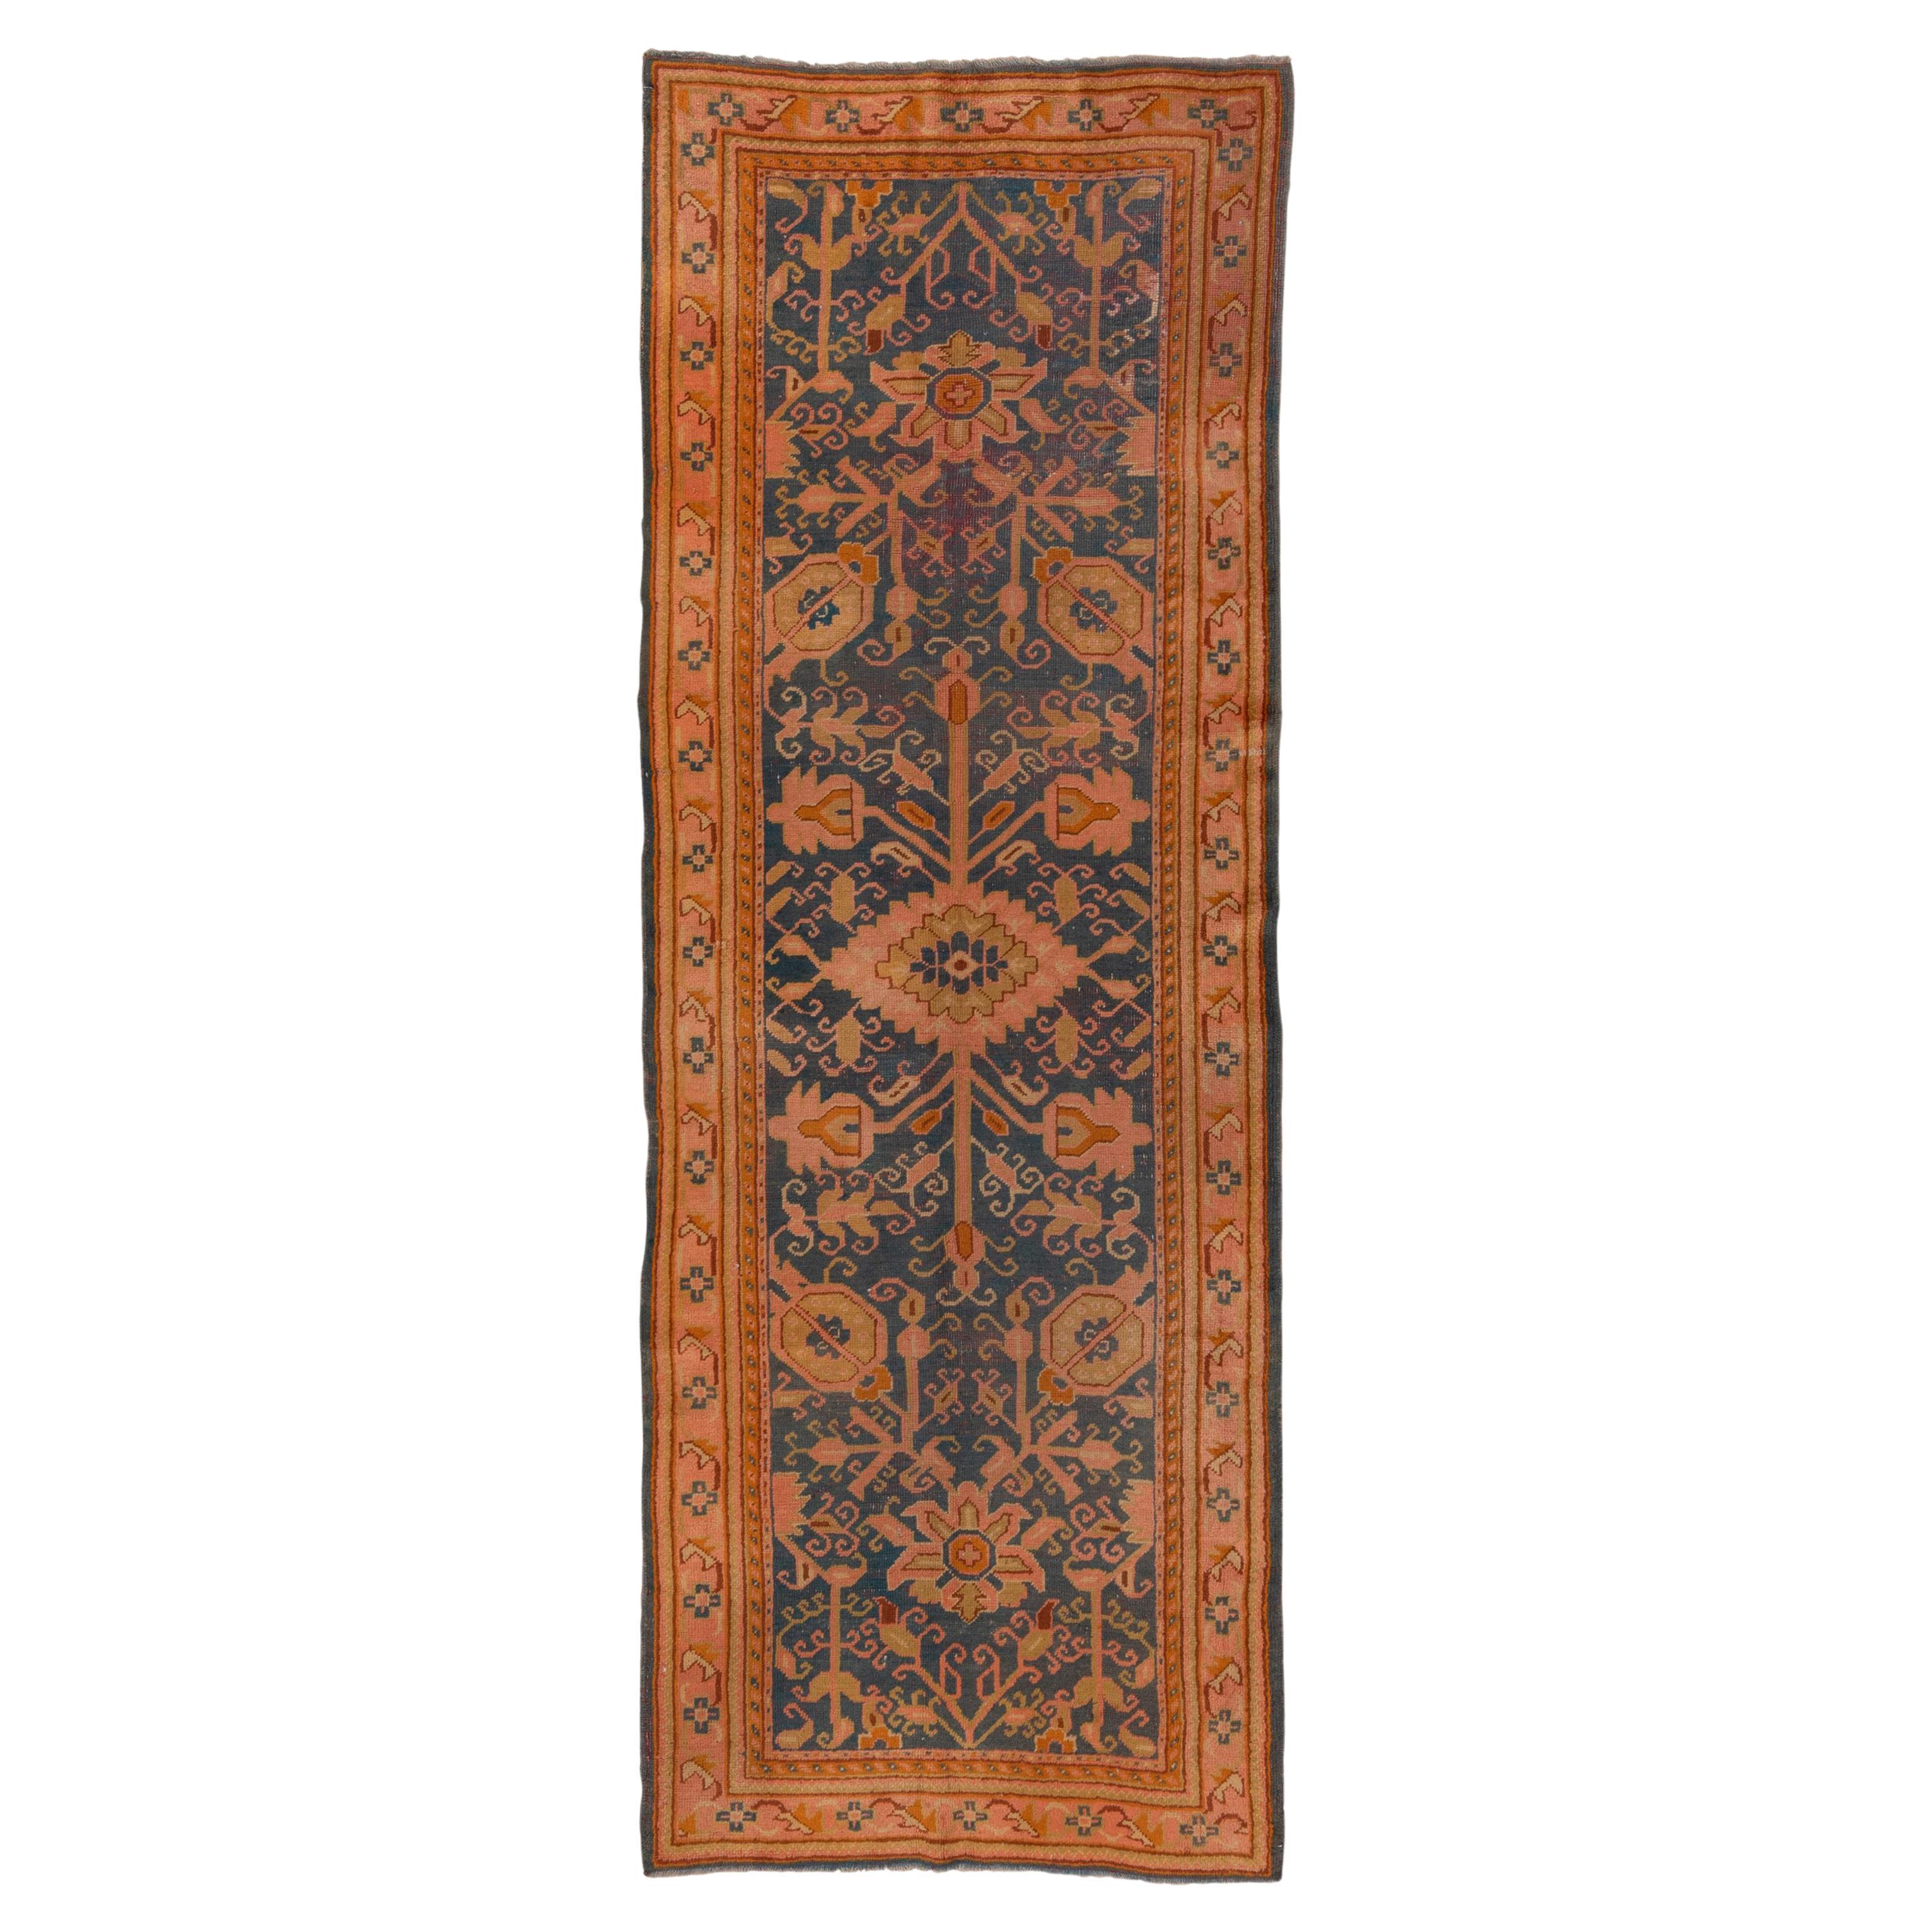 Antique Turkish Oushak Wide Runner, Teal Field, Pink & Gold Borders, circa 1900s